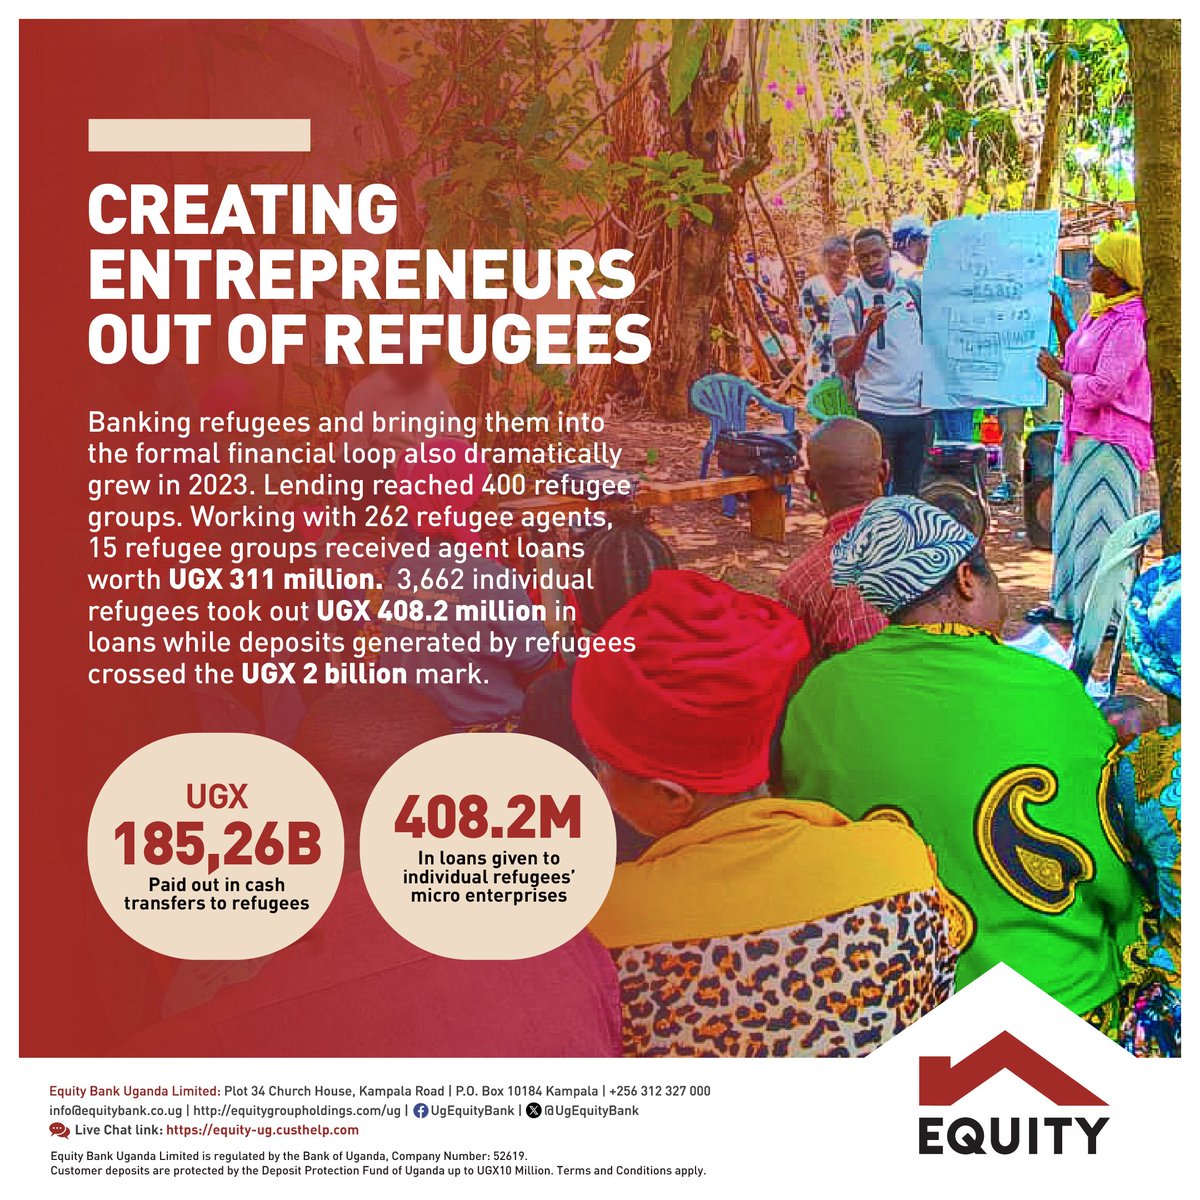 Proud to share that in 2023, we empowered refugees to become the entrepreneurs of tomorrow! At Equity Bank, we stand in solidarity with displaced communities, giving free financial education, unsecured loans, and vital access to key financial services. #EmpowerRefugees…